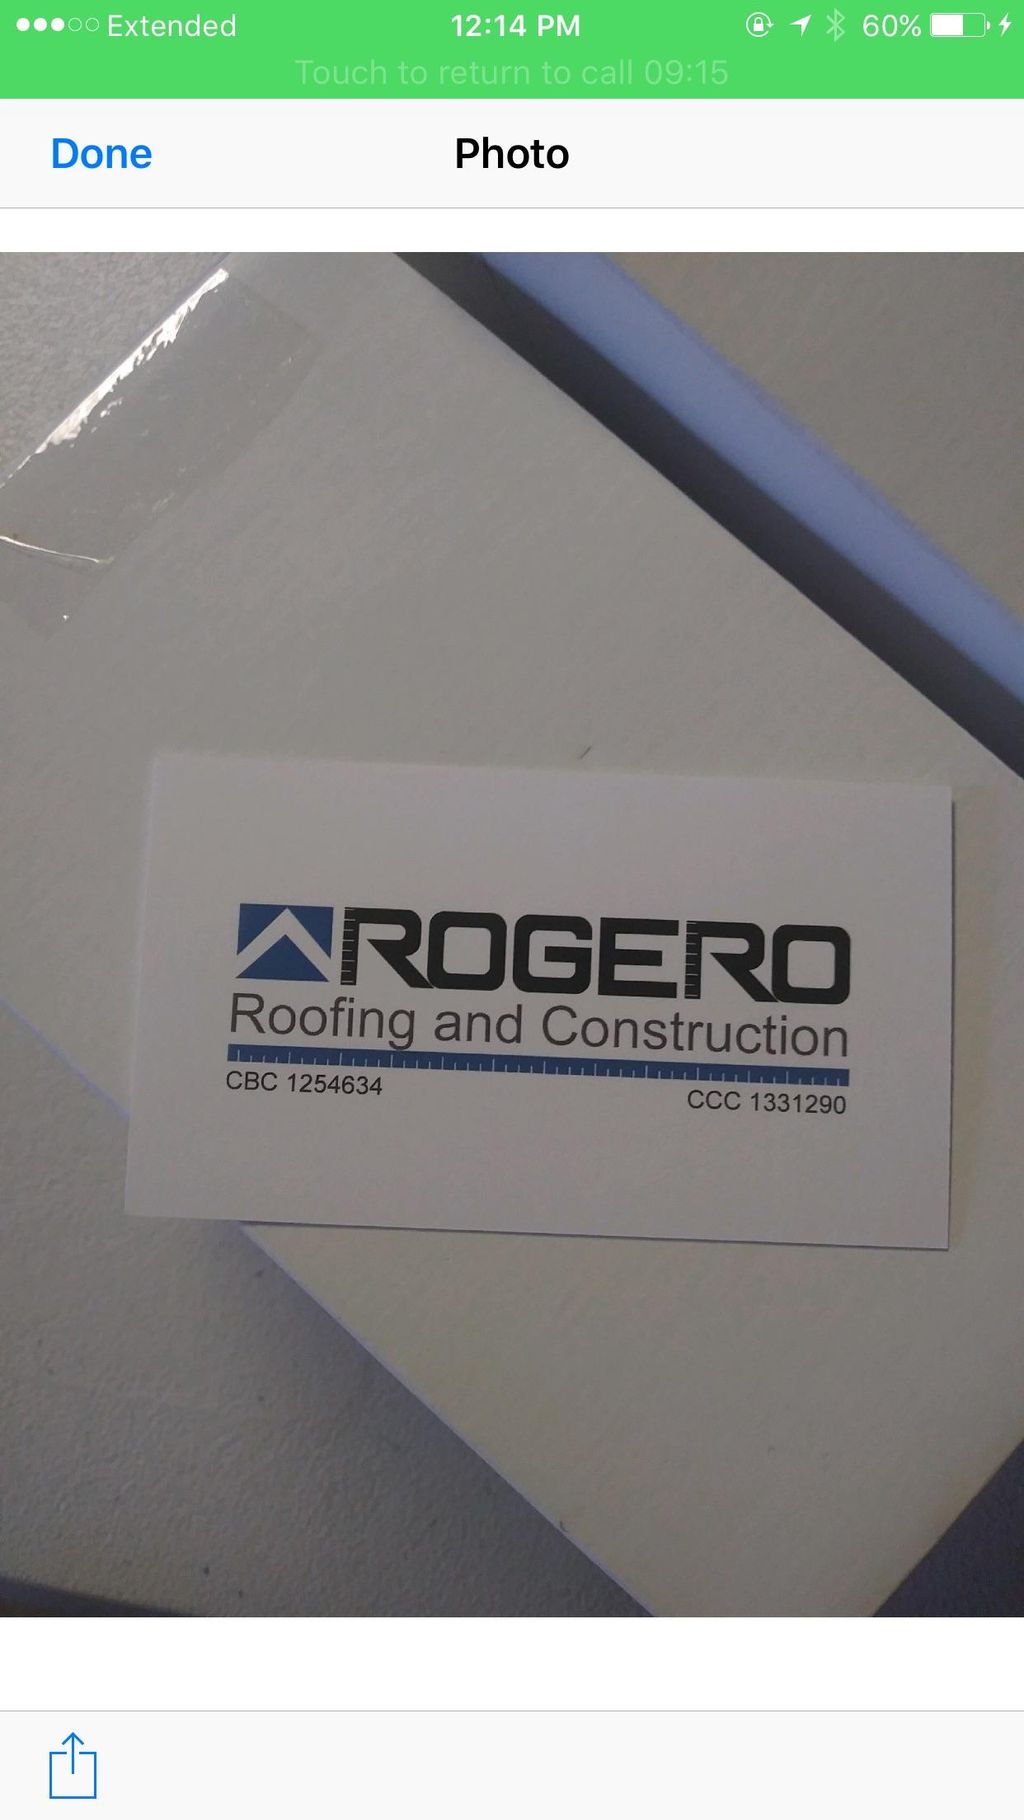 Rogero Roofing And Construction